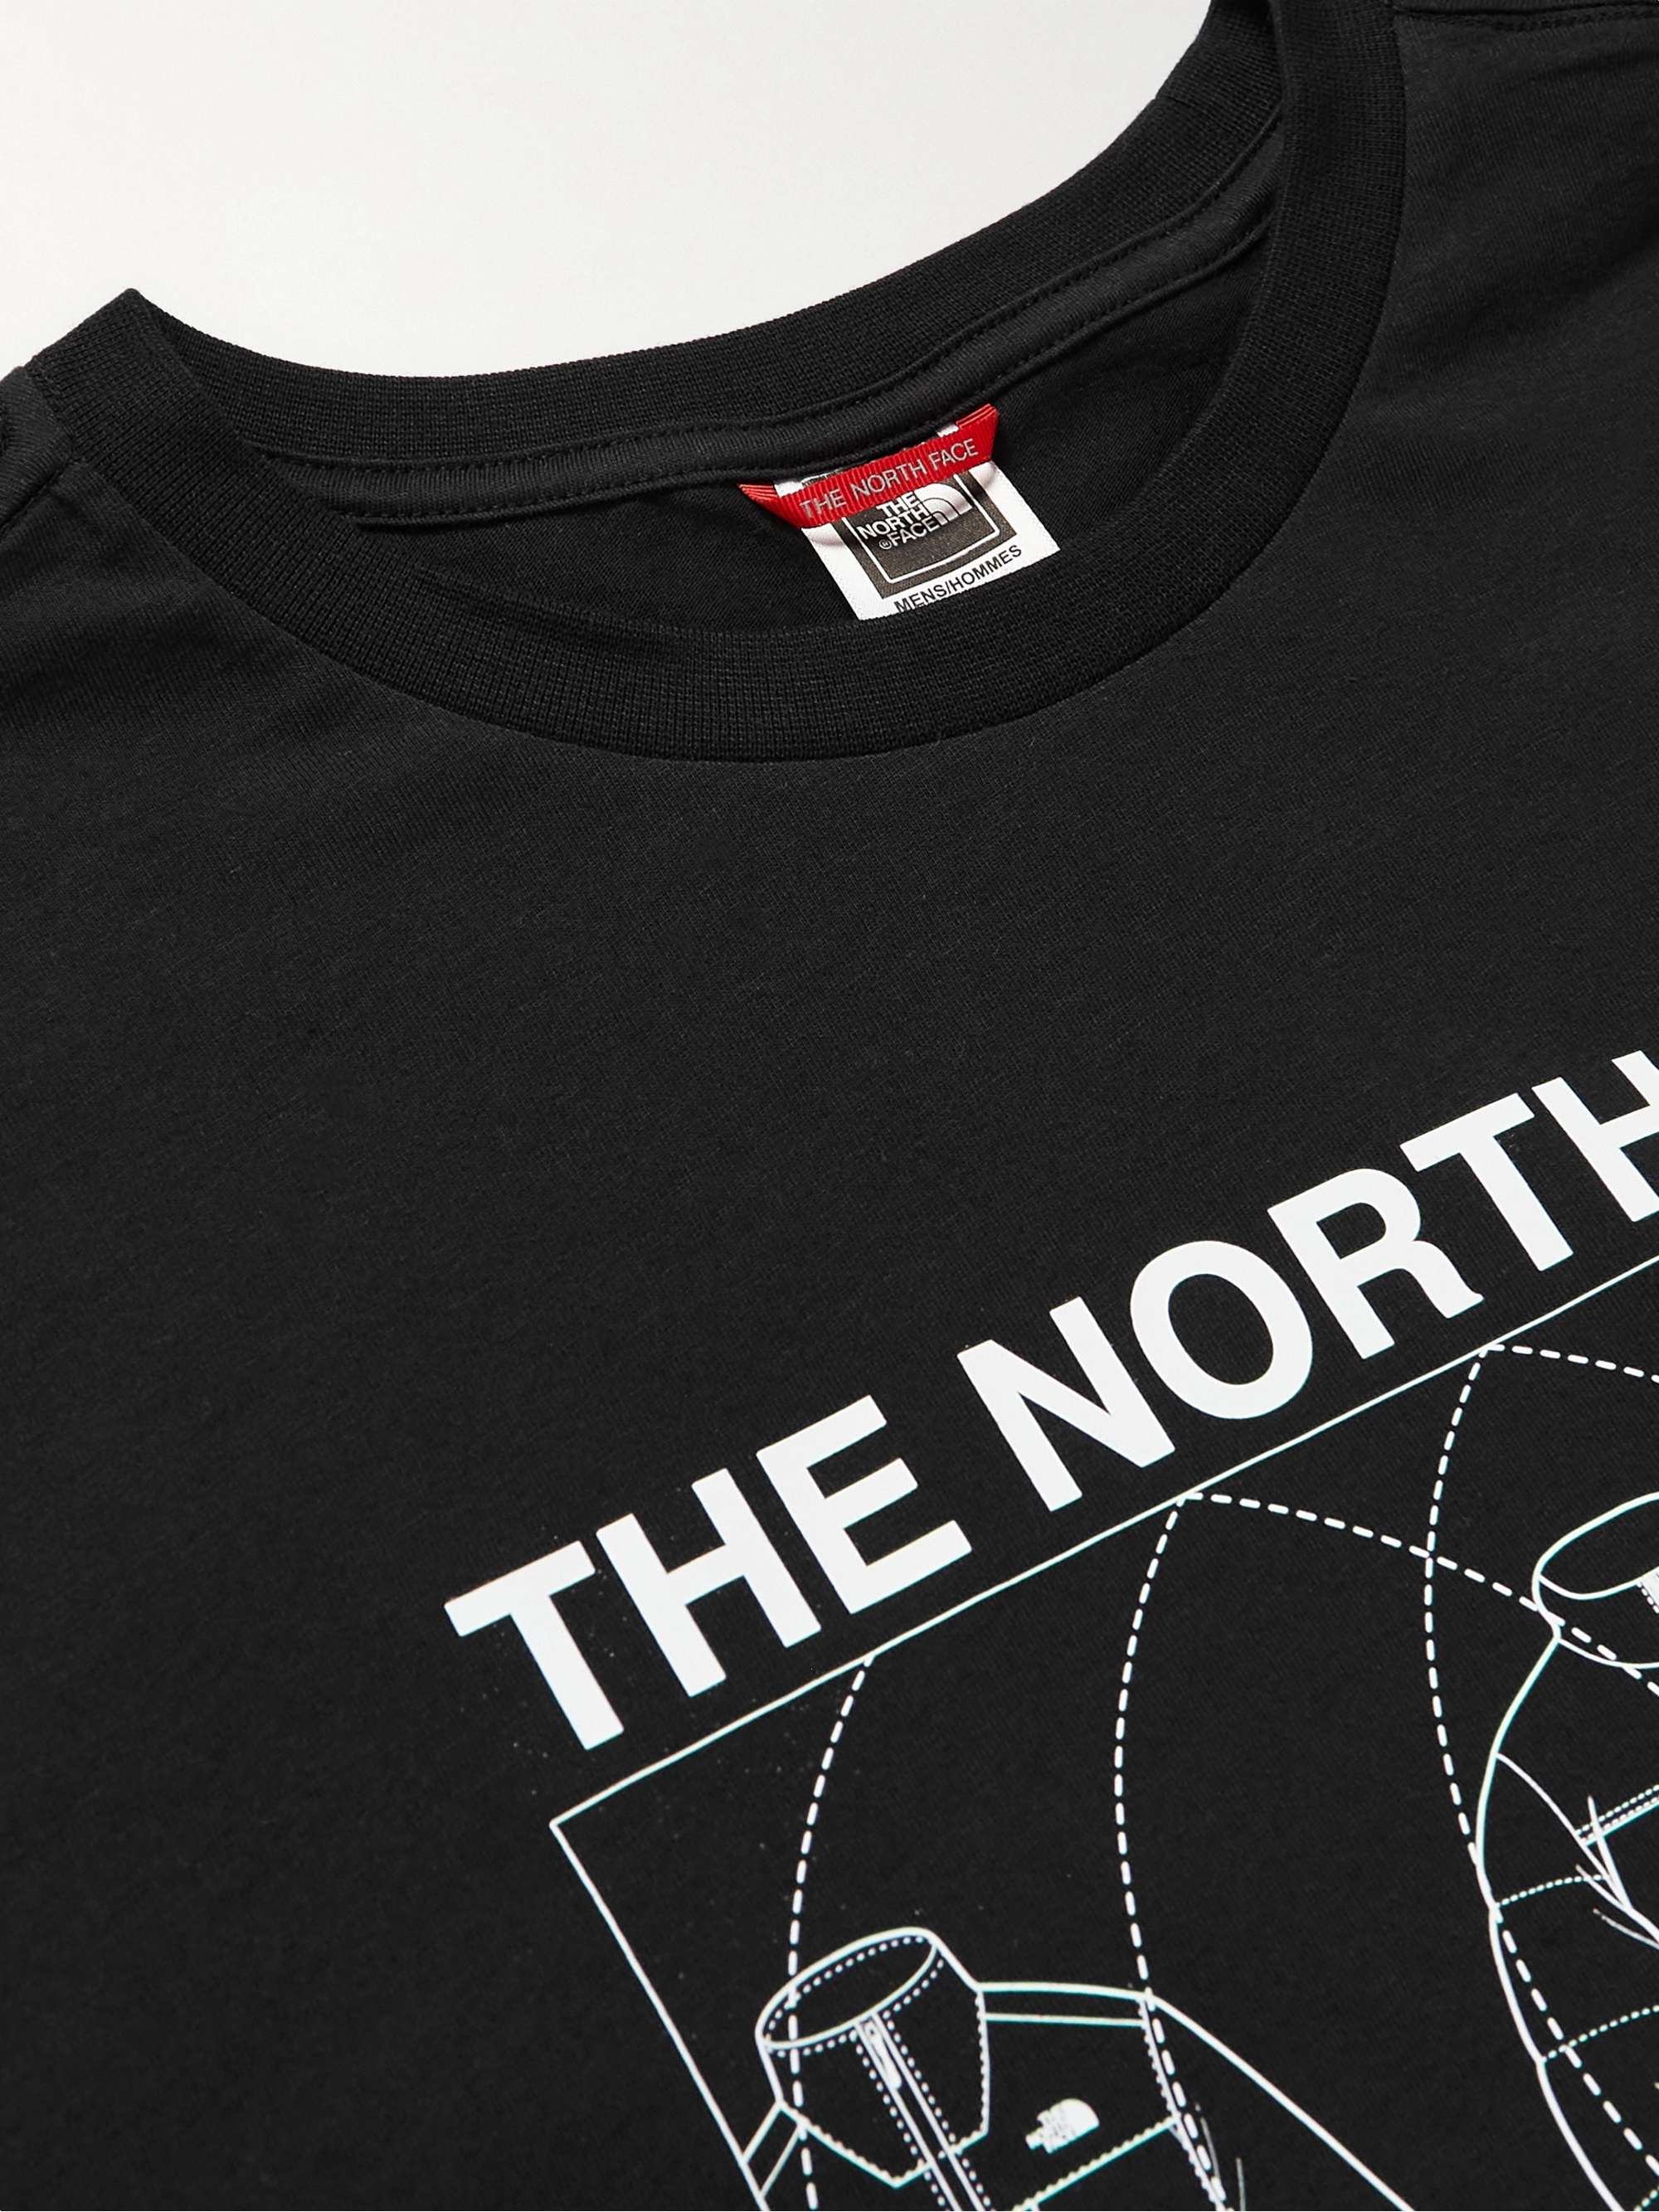 THE NORTH FACE Printed Cotton-Jersey T-Shirt